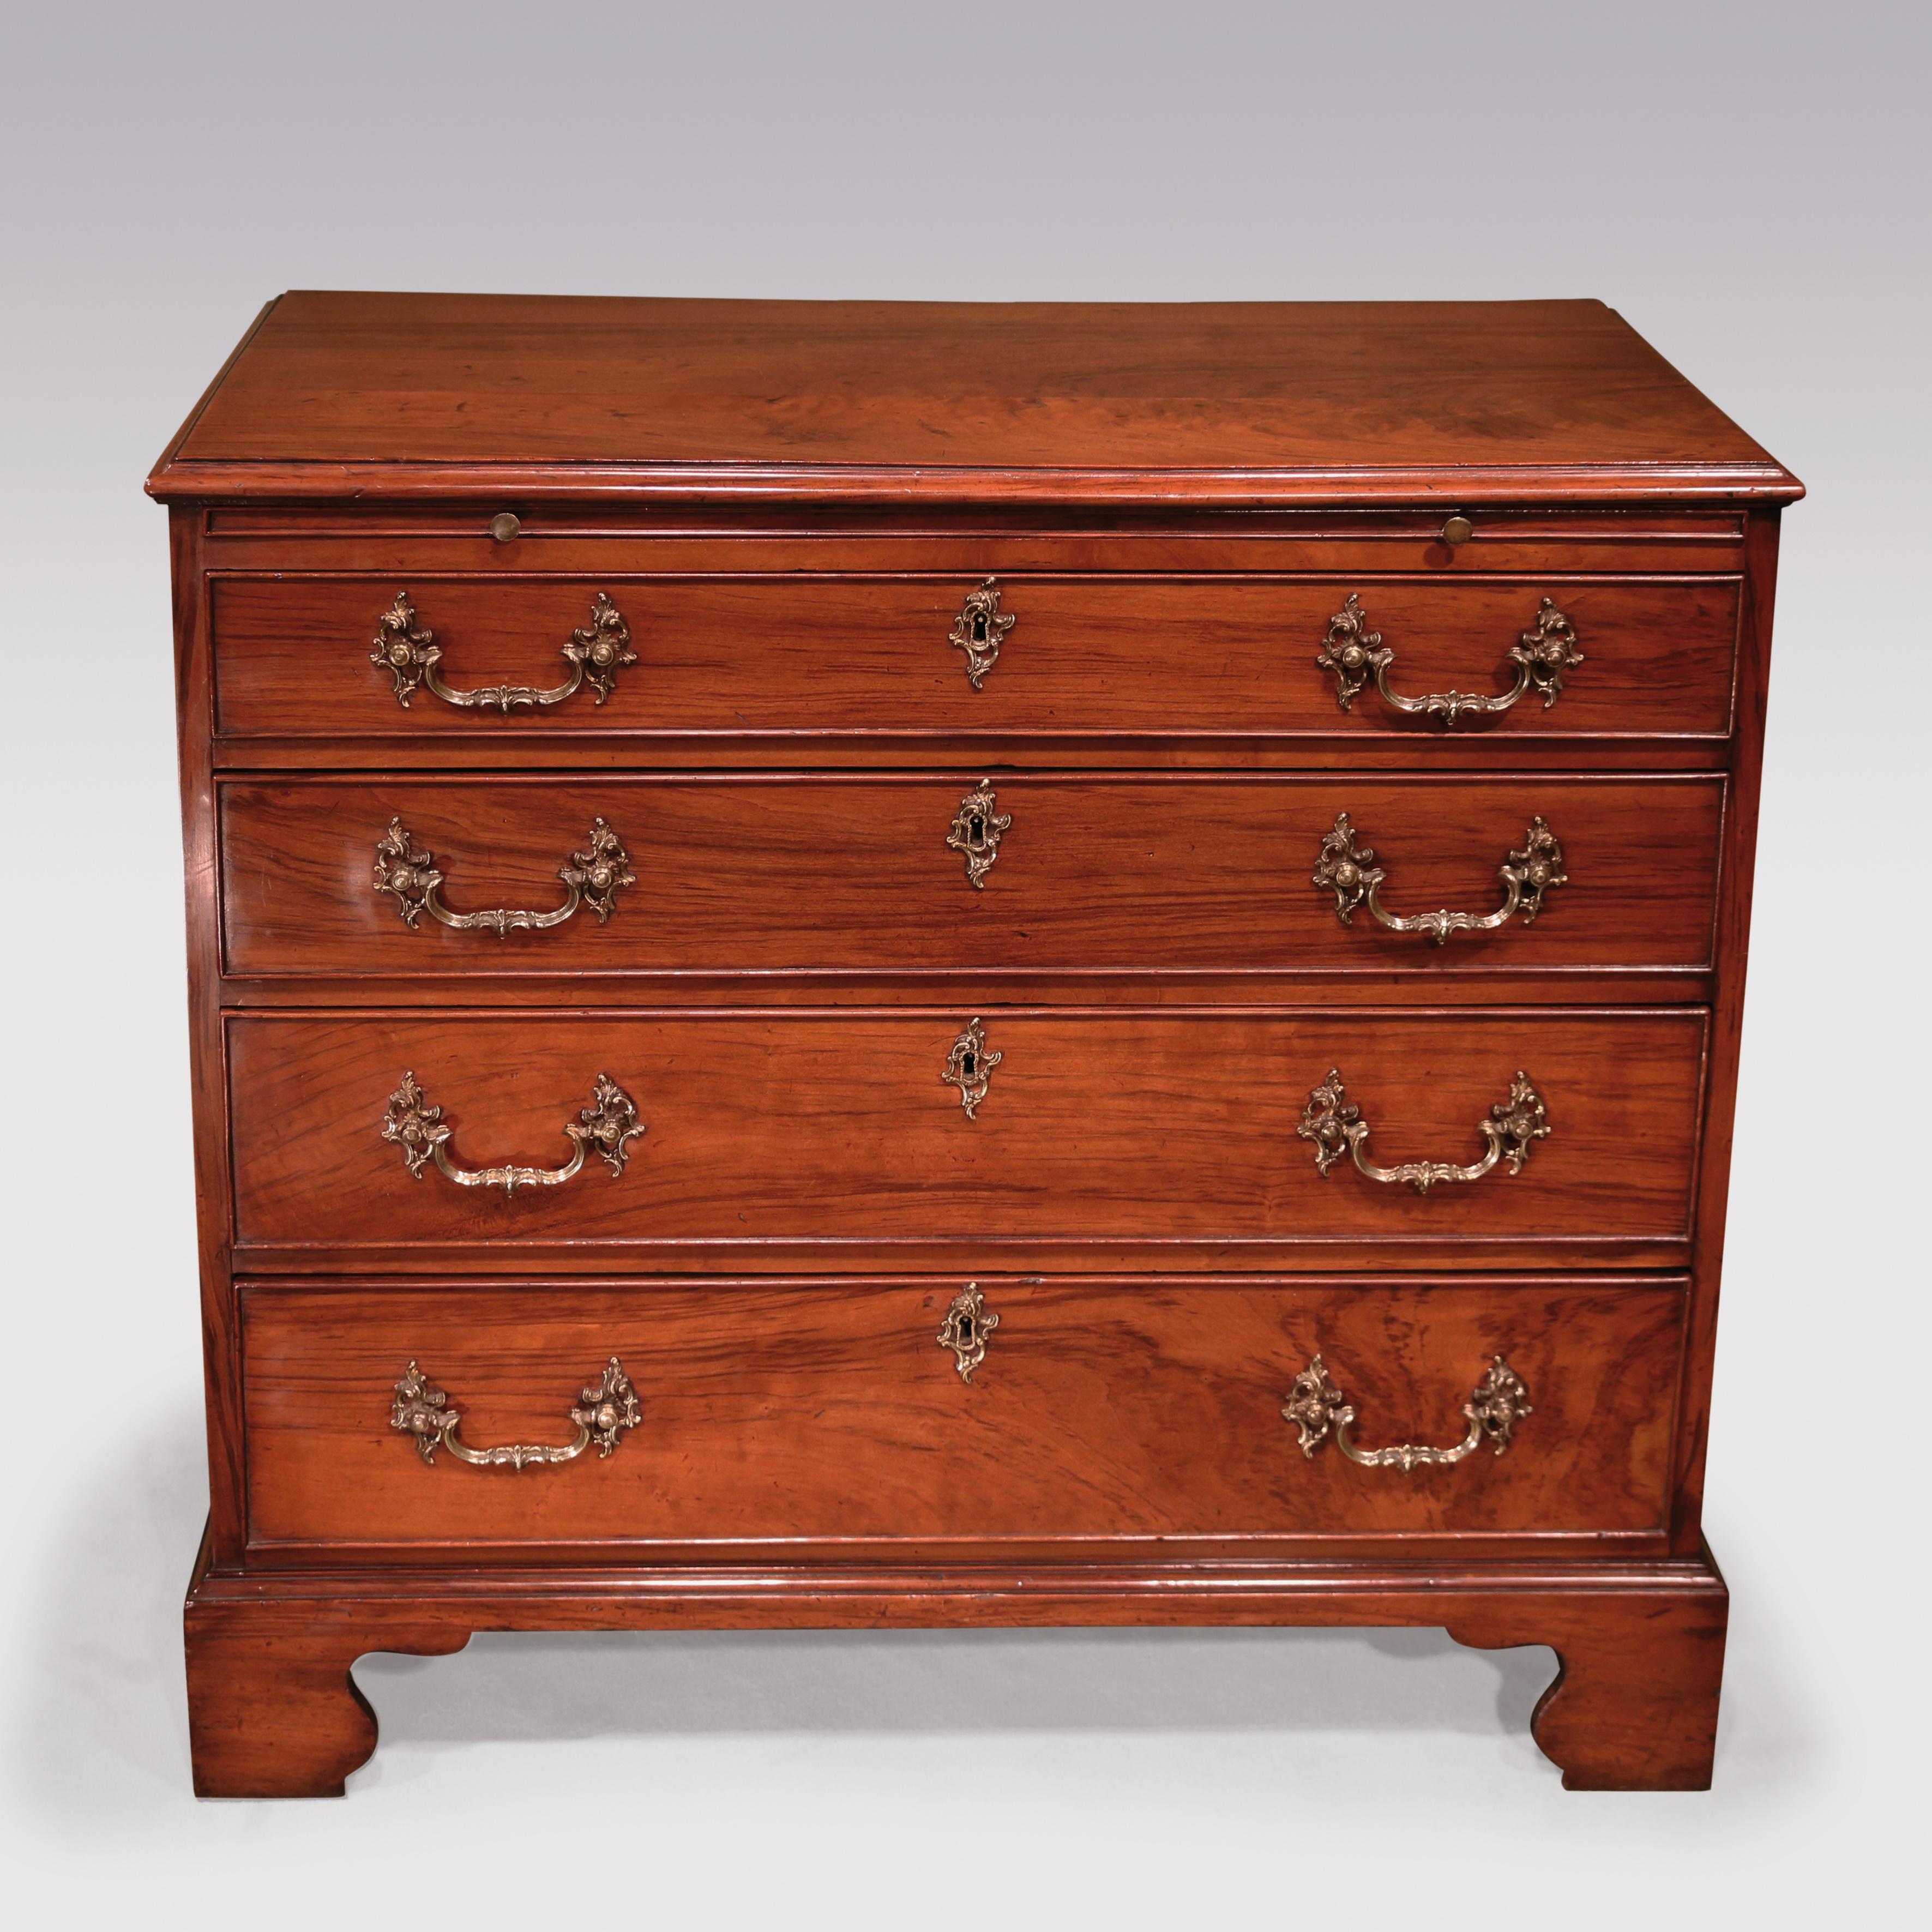 An unusual mid-18th century Chippendale period padouk wood straight front chest, above moulded edge top, having brushing slide and 4 graduated cock-beaded drawers, retaining original rococo handles, supported on shaped bracket feet.